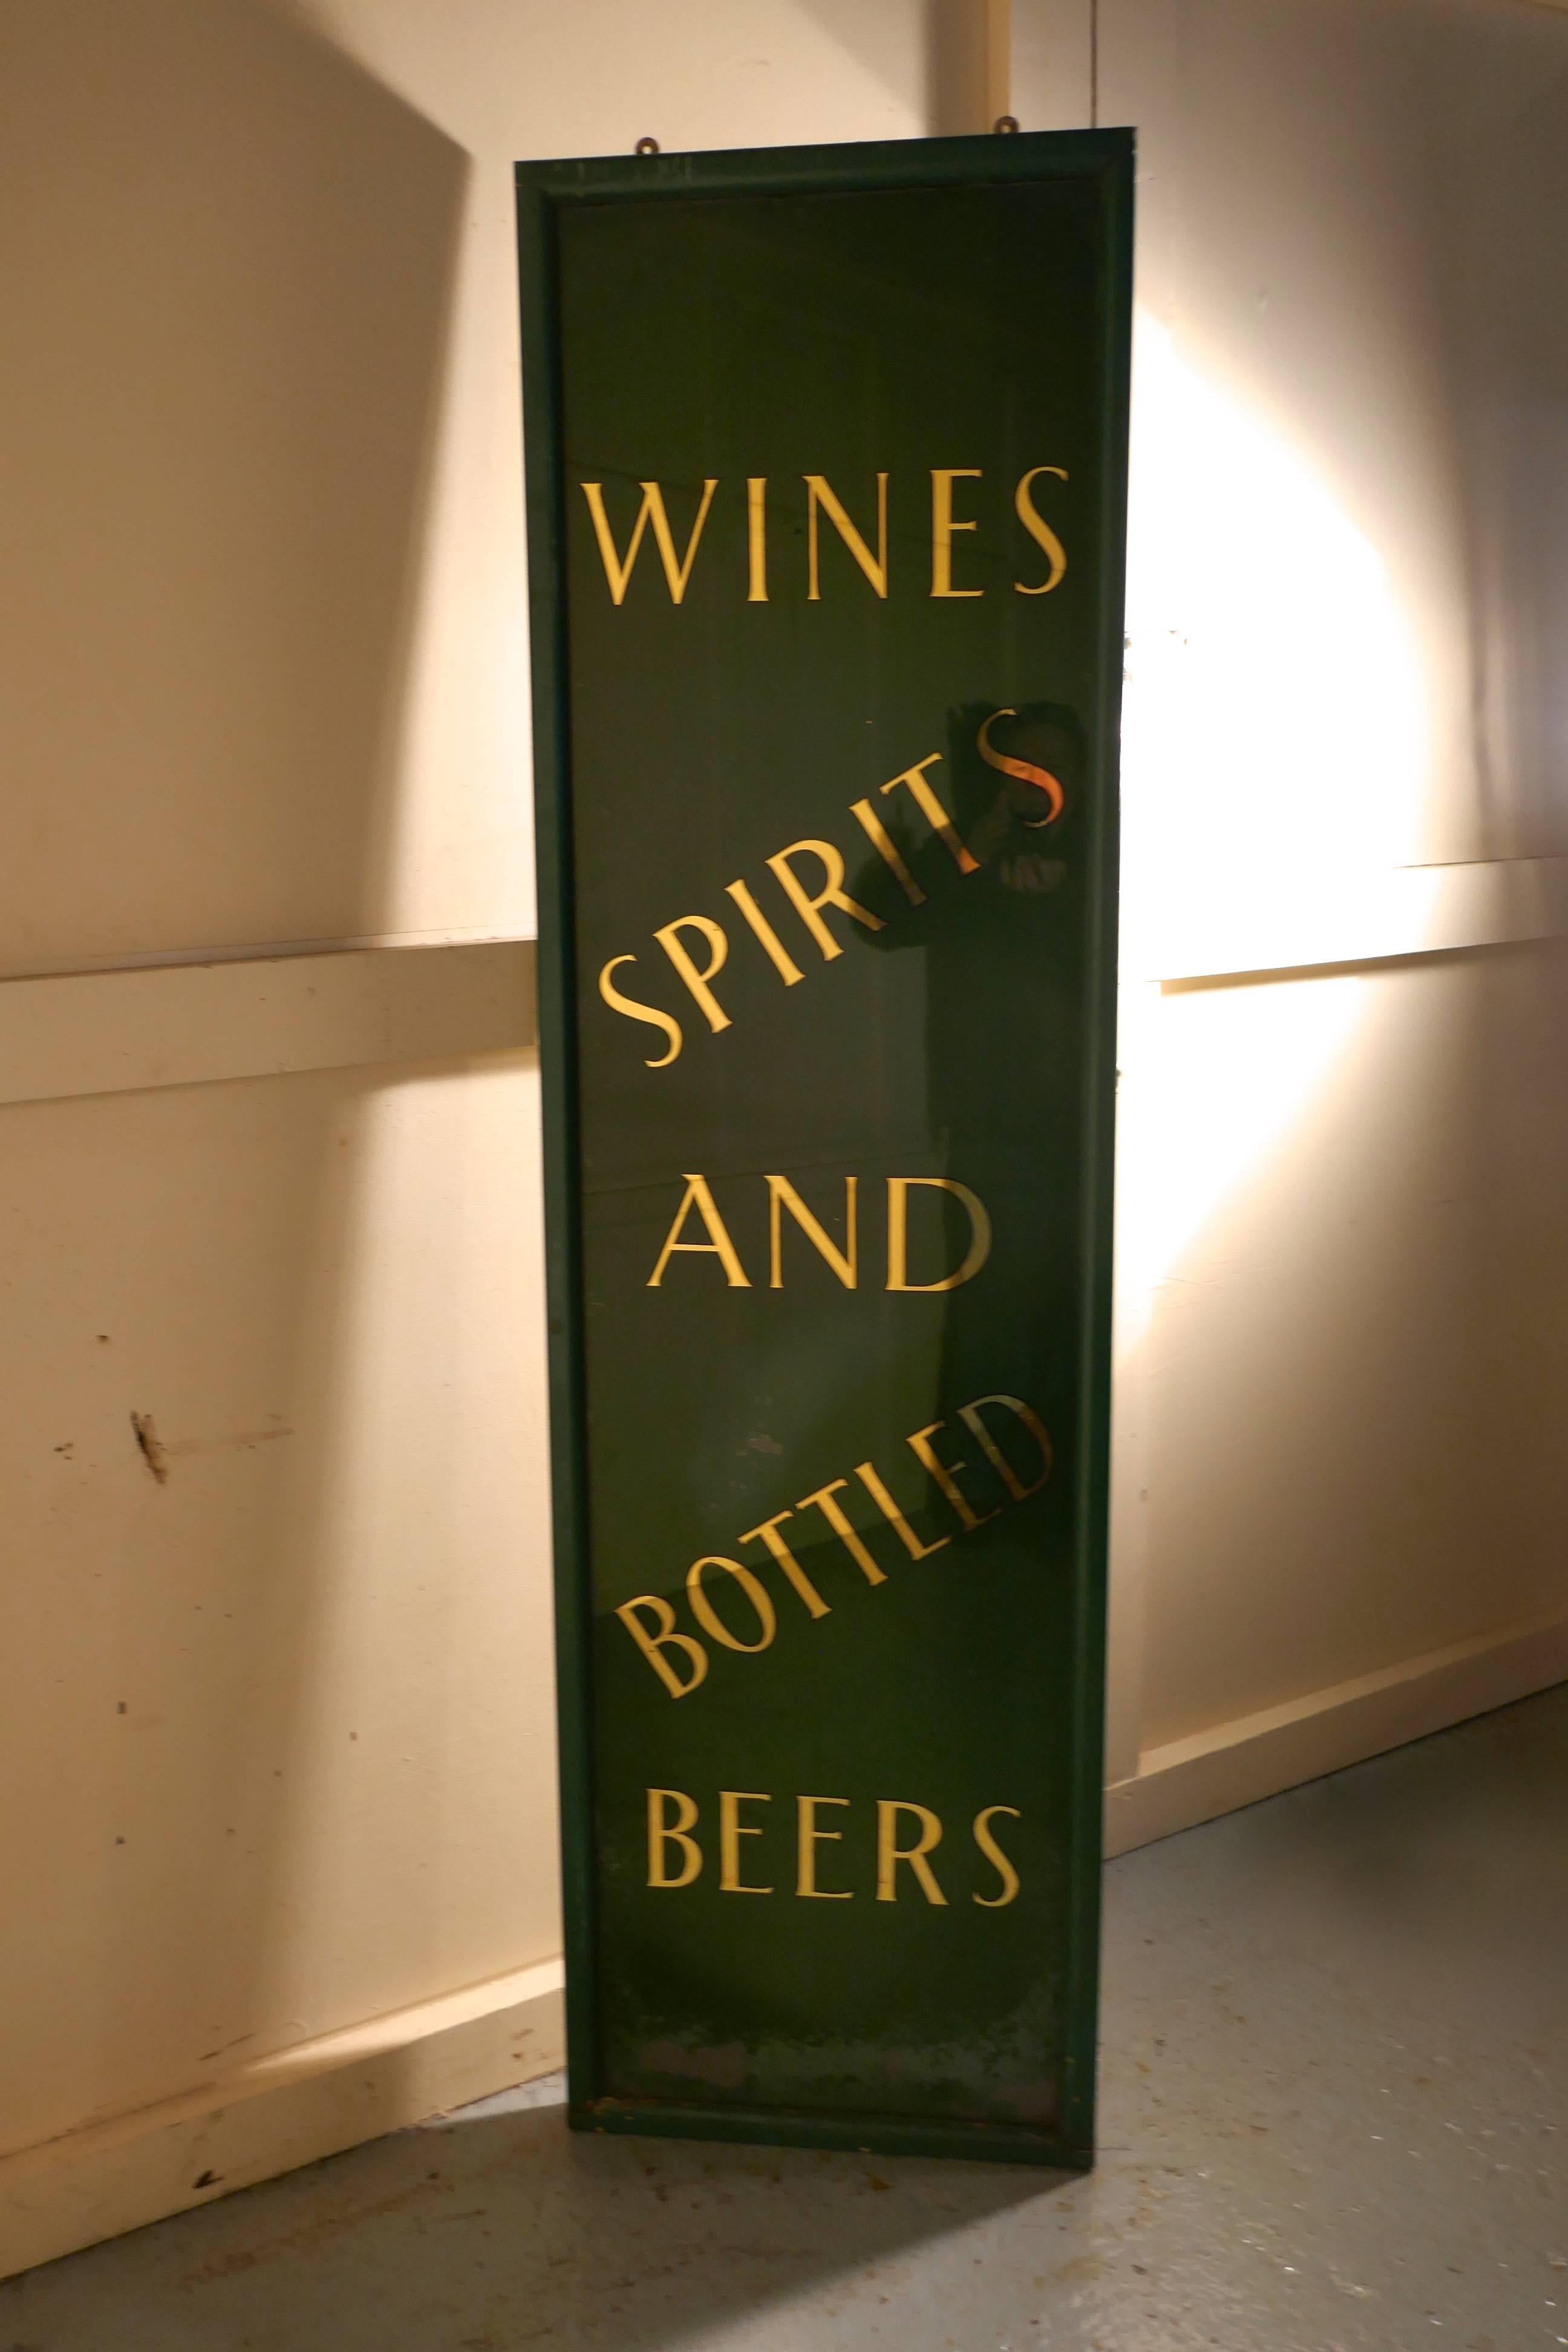 19th century pub mirror advertising sign

This is a great and authentic piece, the sign has gold mirrored lettering on green glass, the glass is set in a green frame and is advertising, wines spirits and bottled beers
The sign is in generally